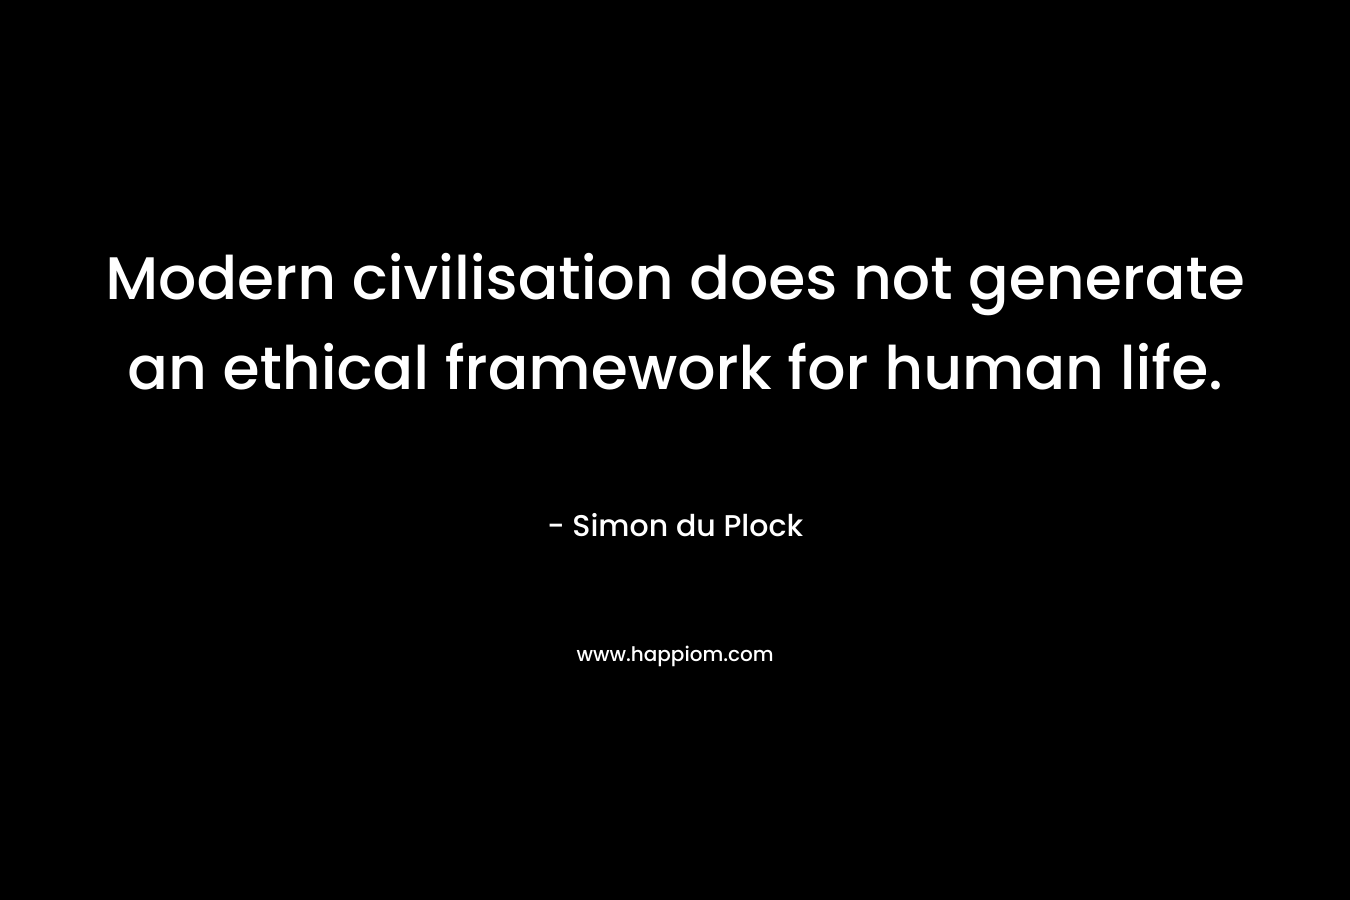 Modern civilisation does not generate an ethical framework for human life.